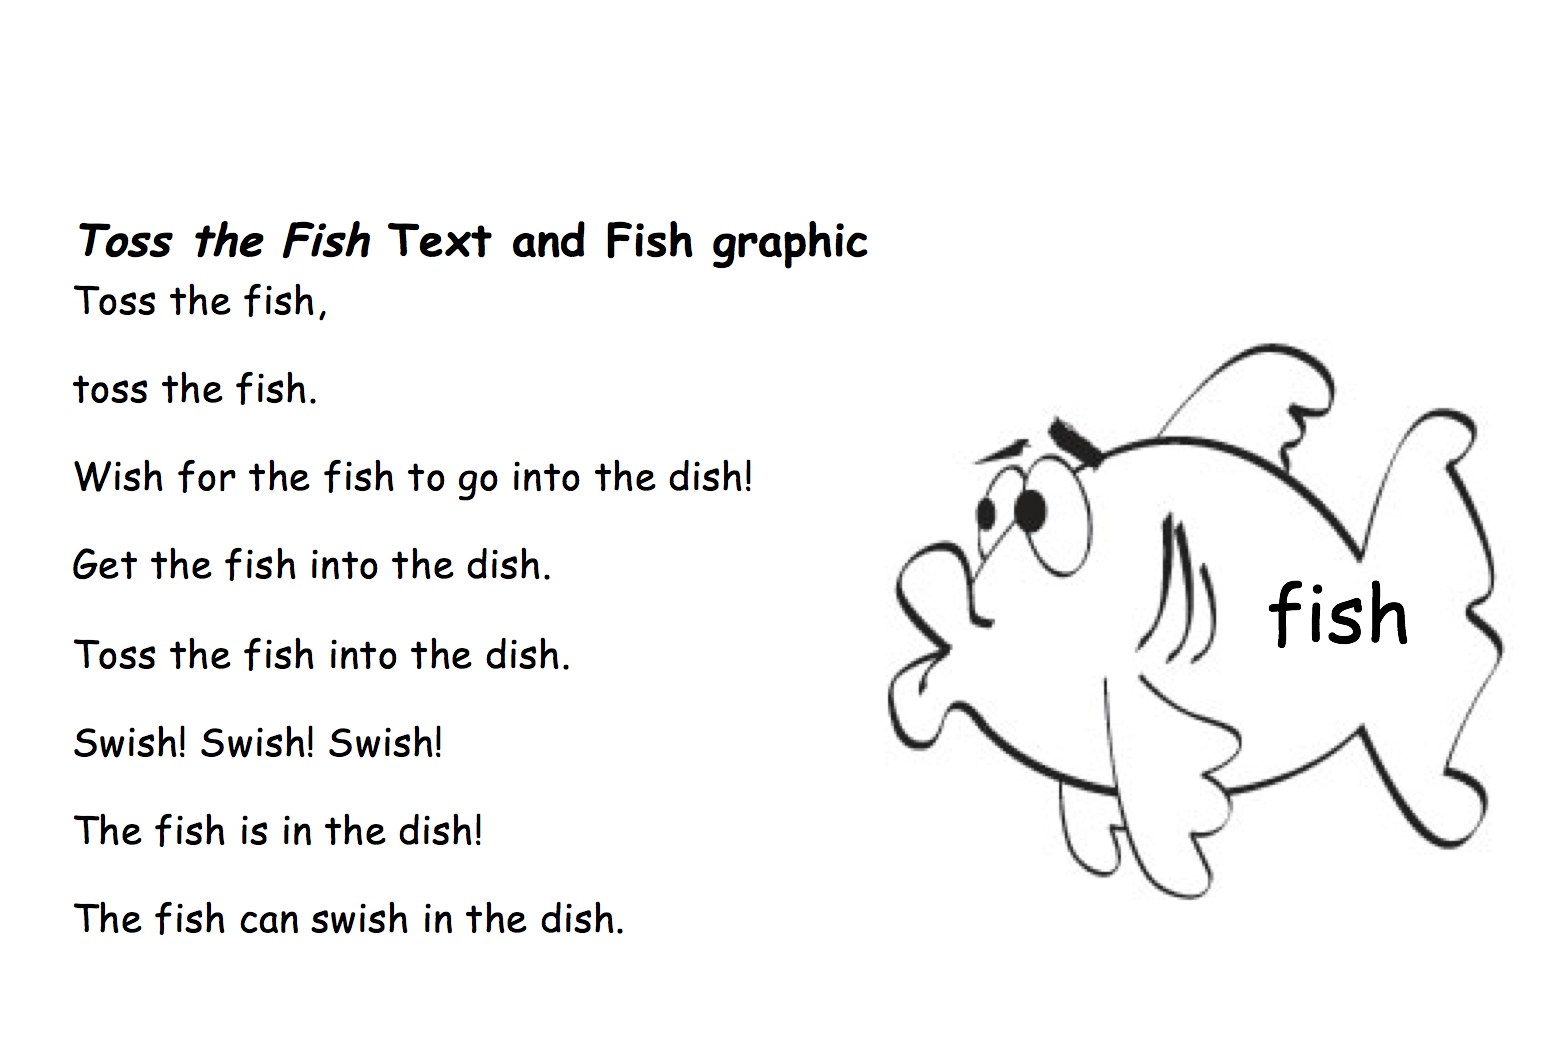 toss-the-fish-text-and-fish-graphic